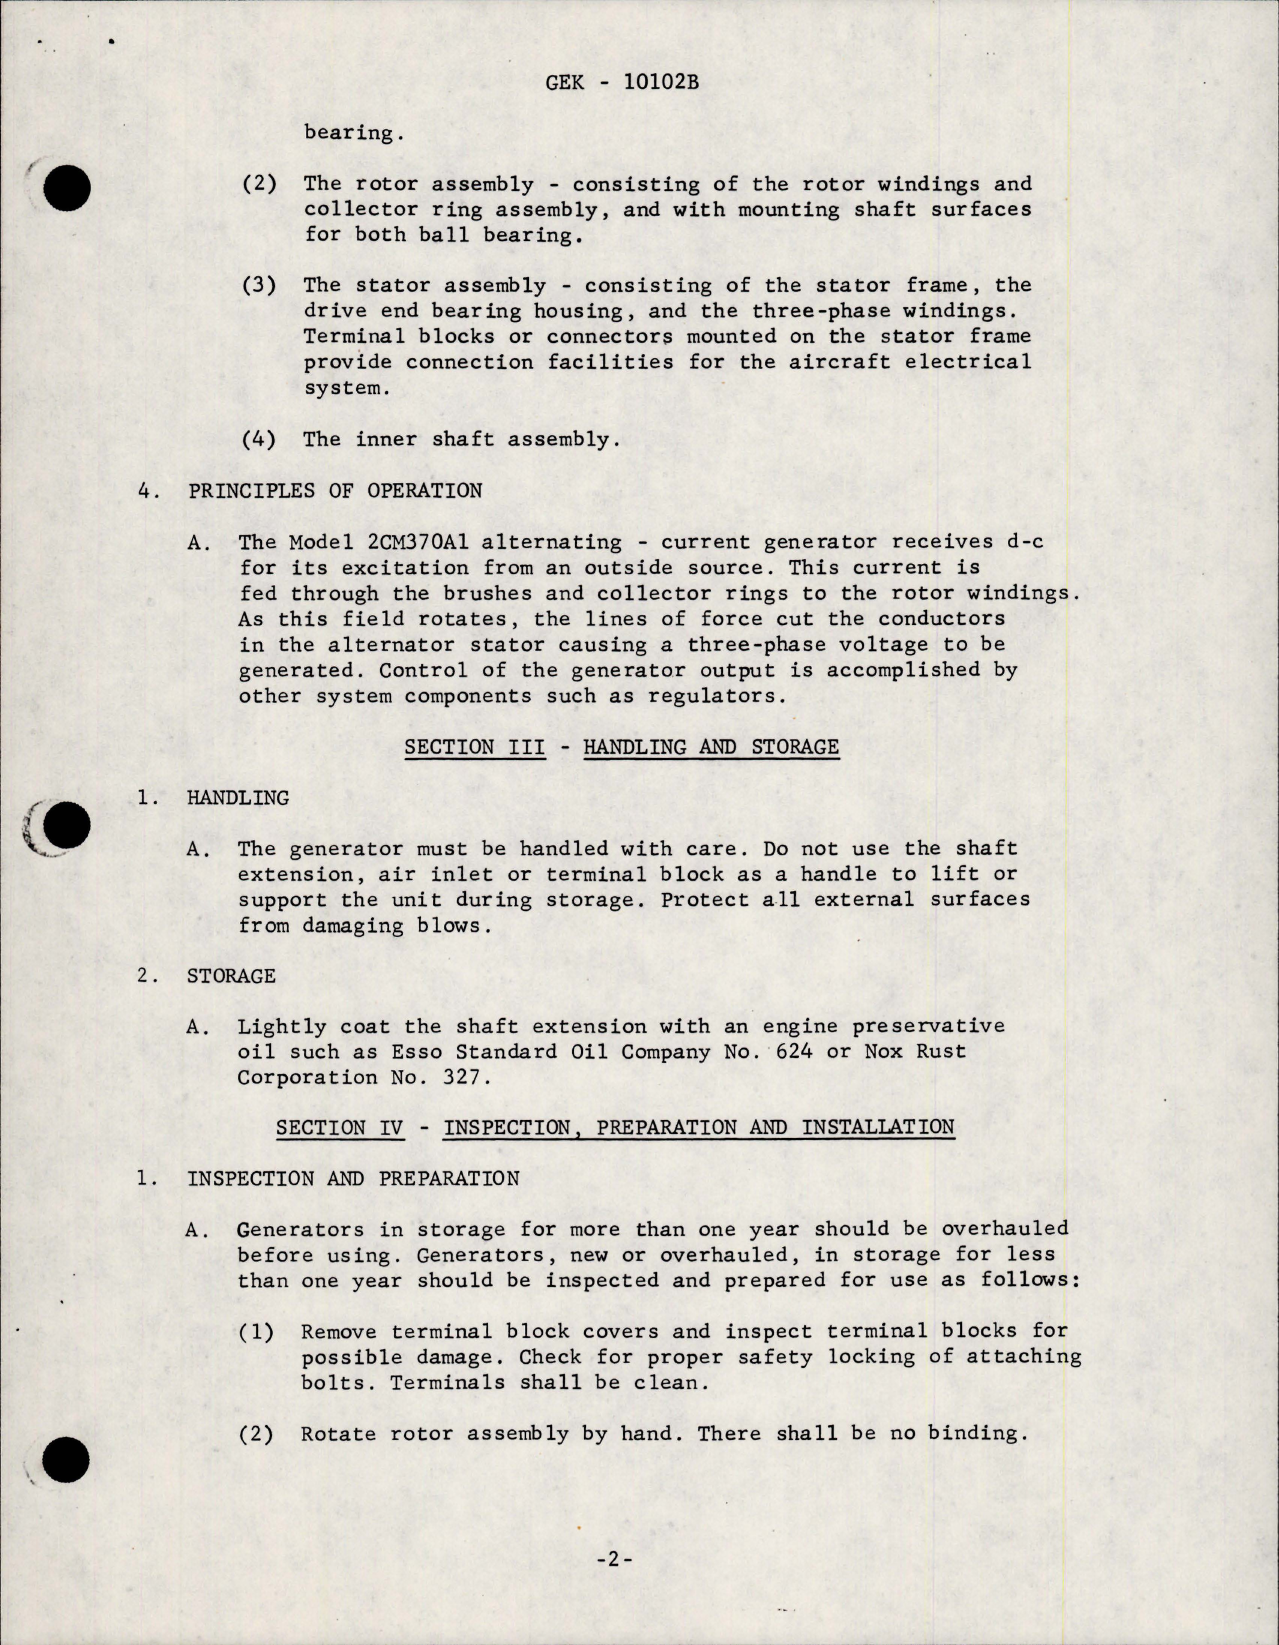 Sample page 5 from AirCorps Library document: Instructional Manual for AC Generator - Models 2CM370A1, 2CM370D1, 2CM370D1A, 2CM370D2 and 2CM370D2A